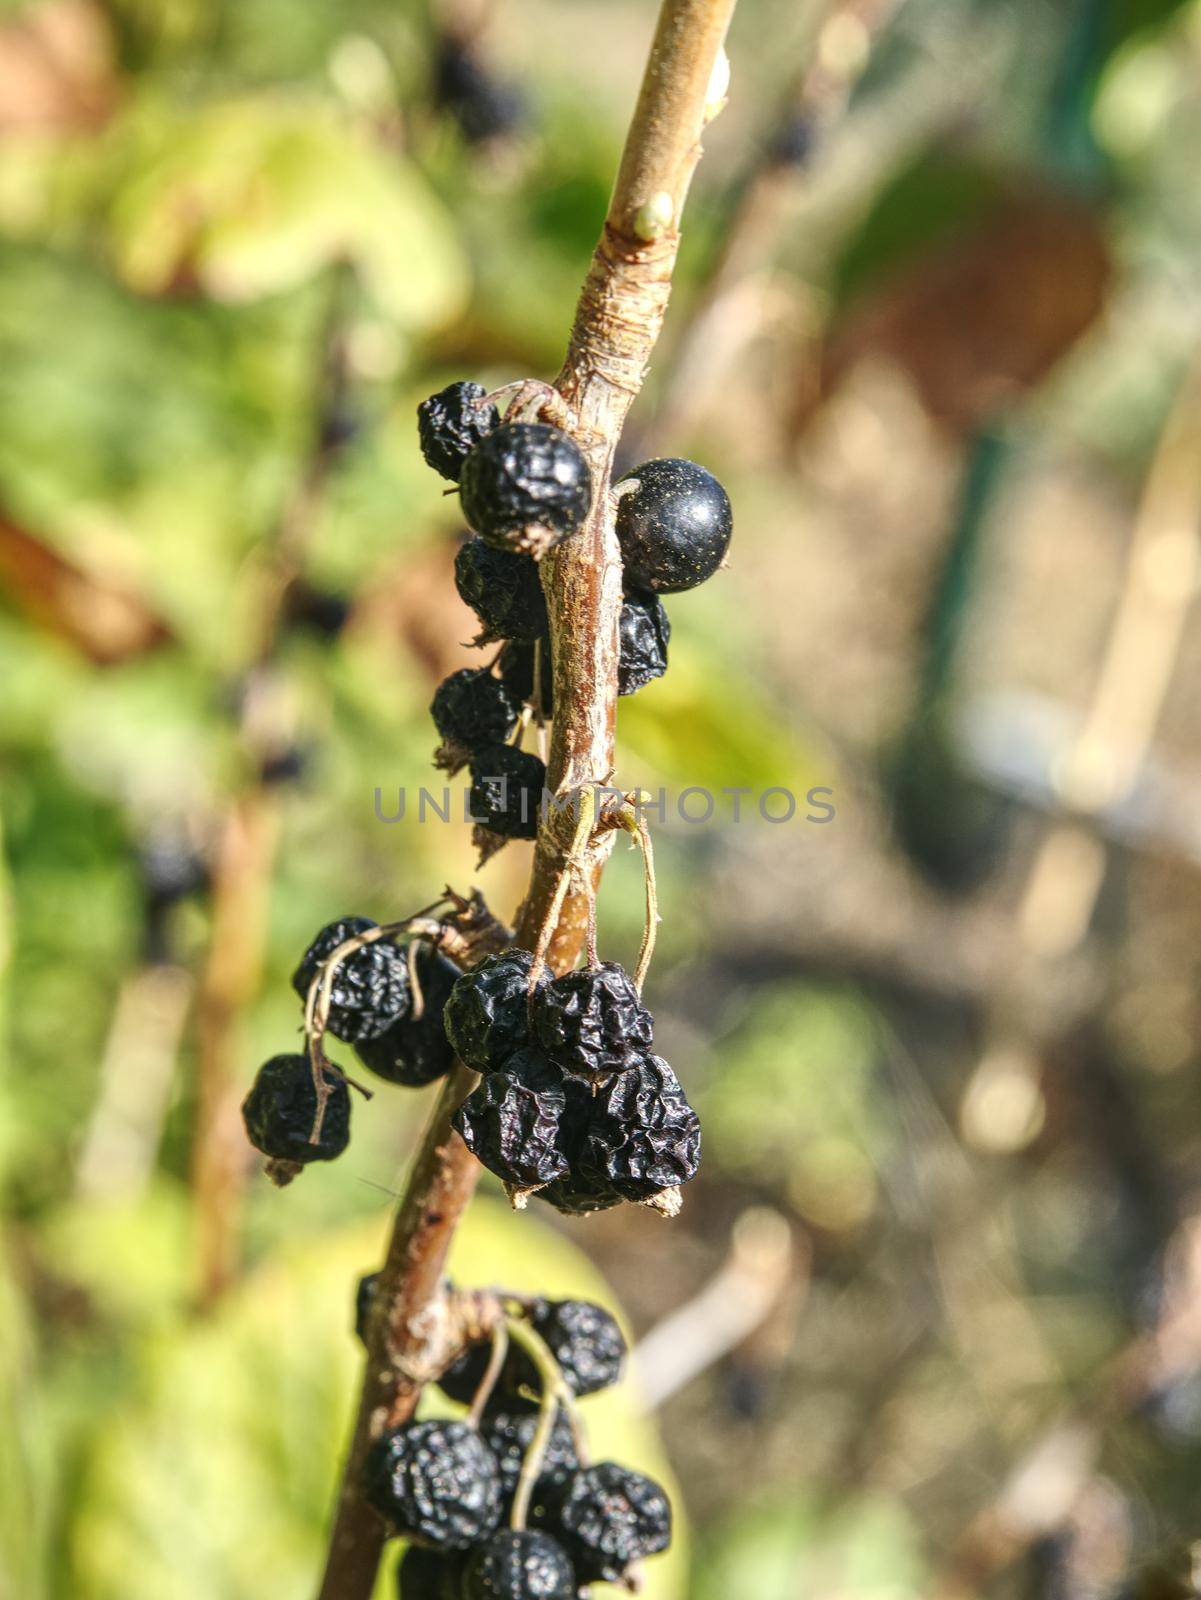 Fruits of black currant forgotten on twigs. Extreme dryness.  by rdonar2